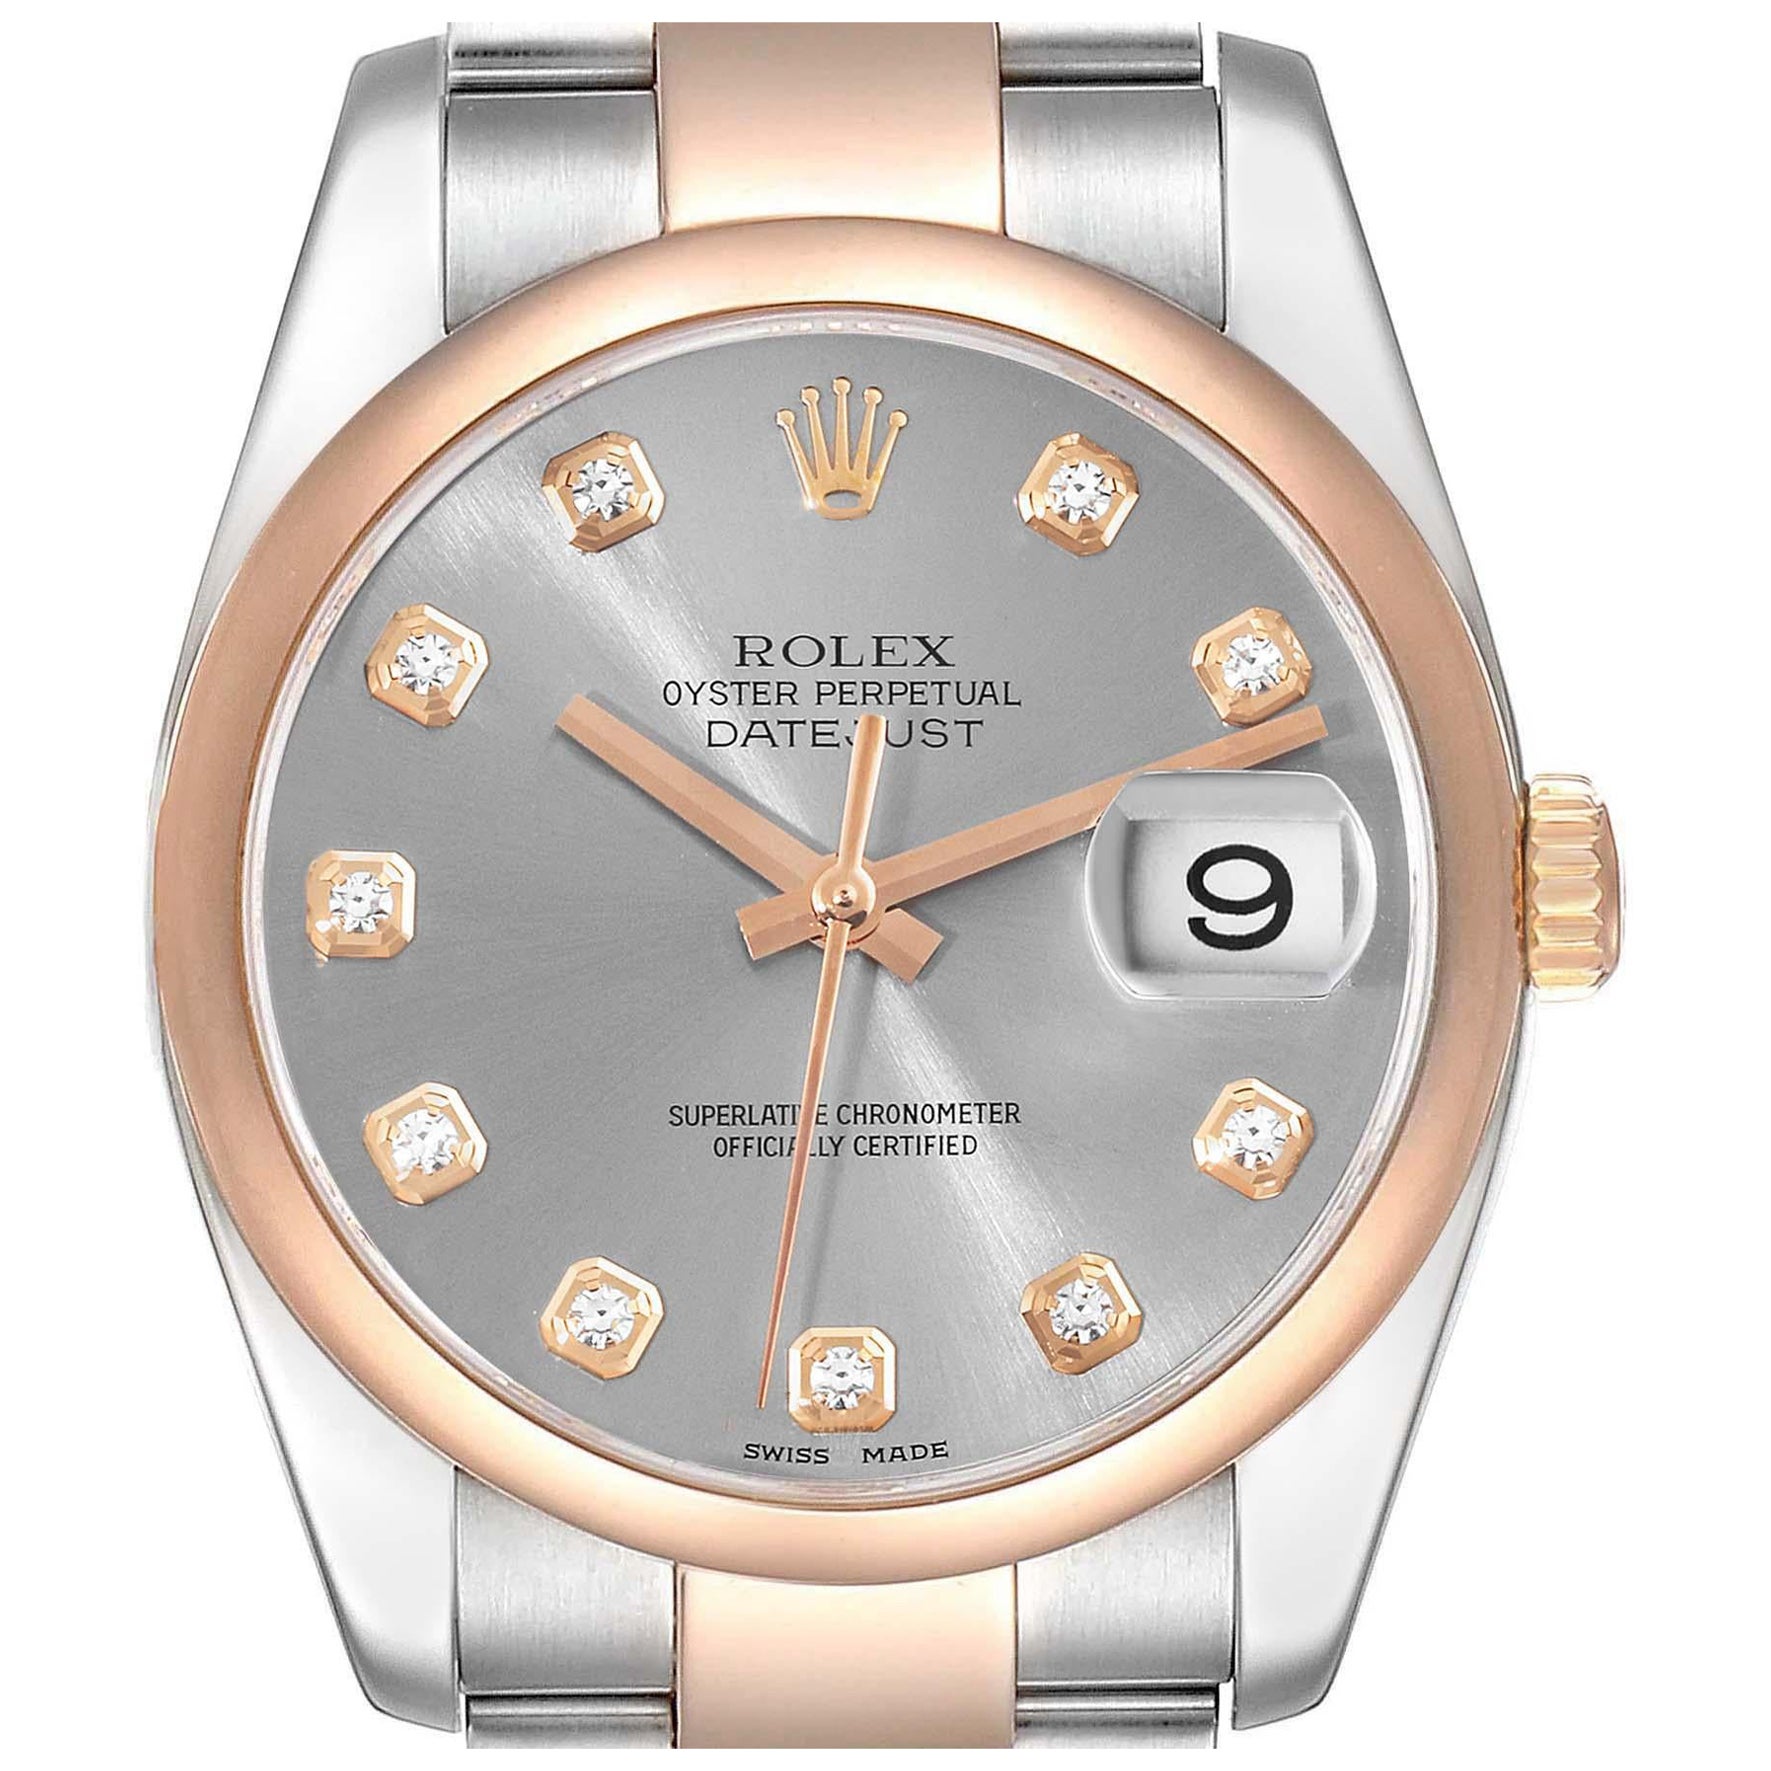 Rolex Datejust 36 Steel Rose Gold Silver Diamond Dial Mens Watch 116201 Box Card For Sale